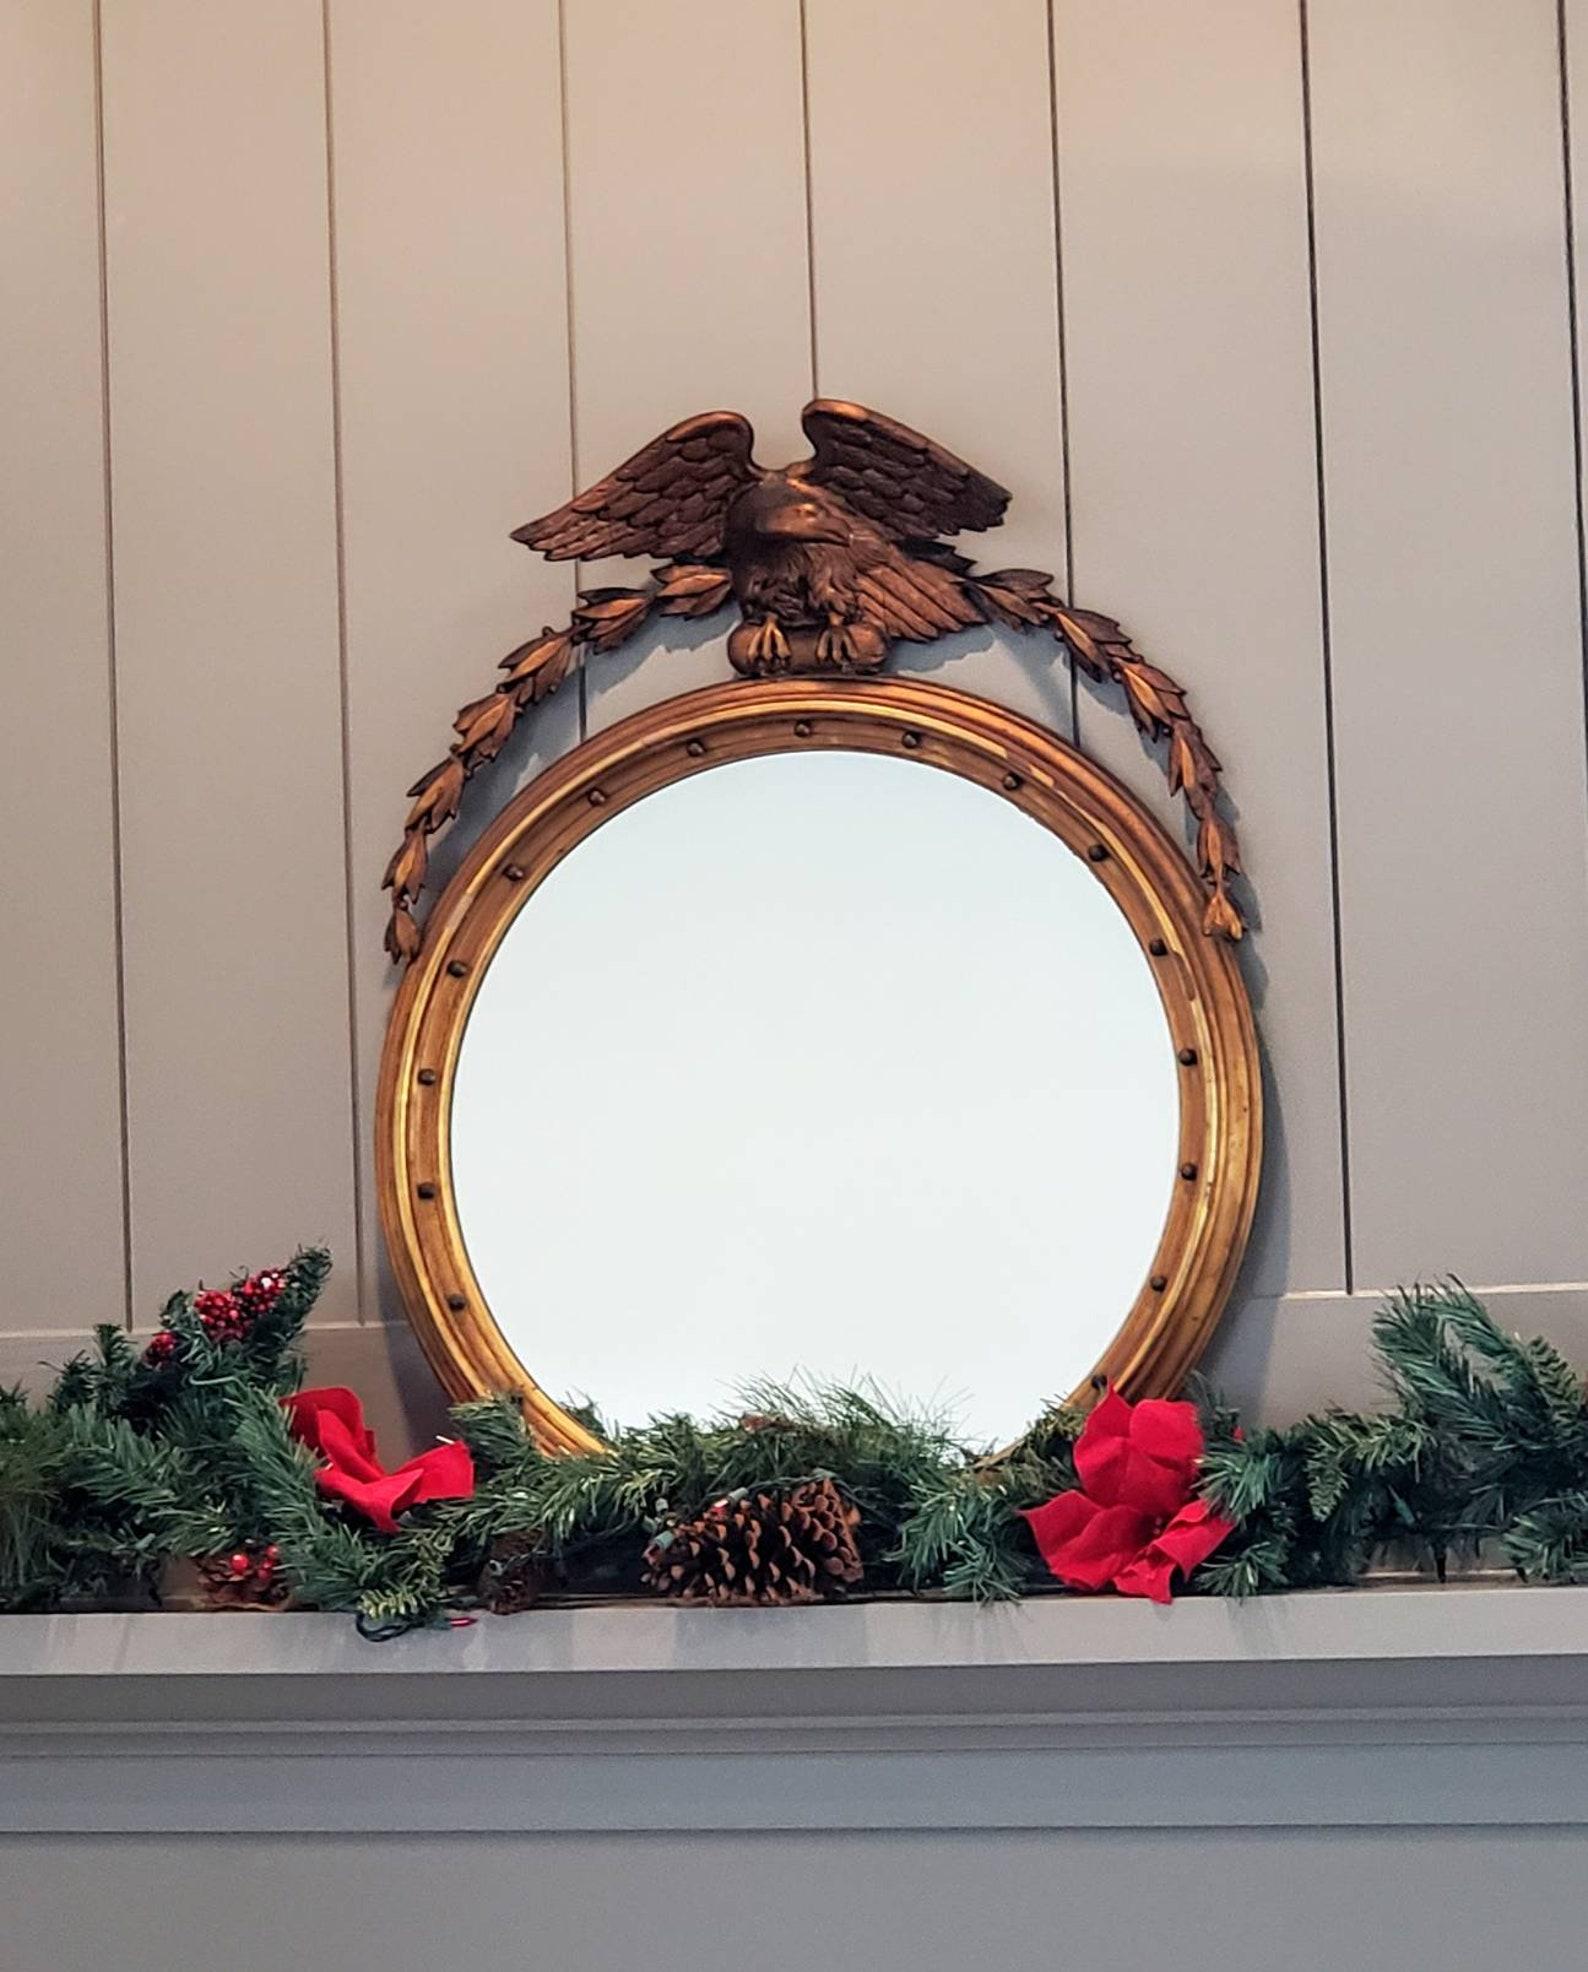 A stunning and rare antique American Federal giltwood wall mirror dating to the first half of the 19th century. The fine quality example surmounted by a large carved figural eagle crest, richly detailed, sculptural form, head protruding out and